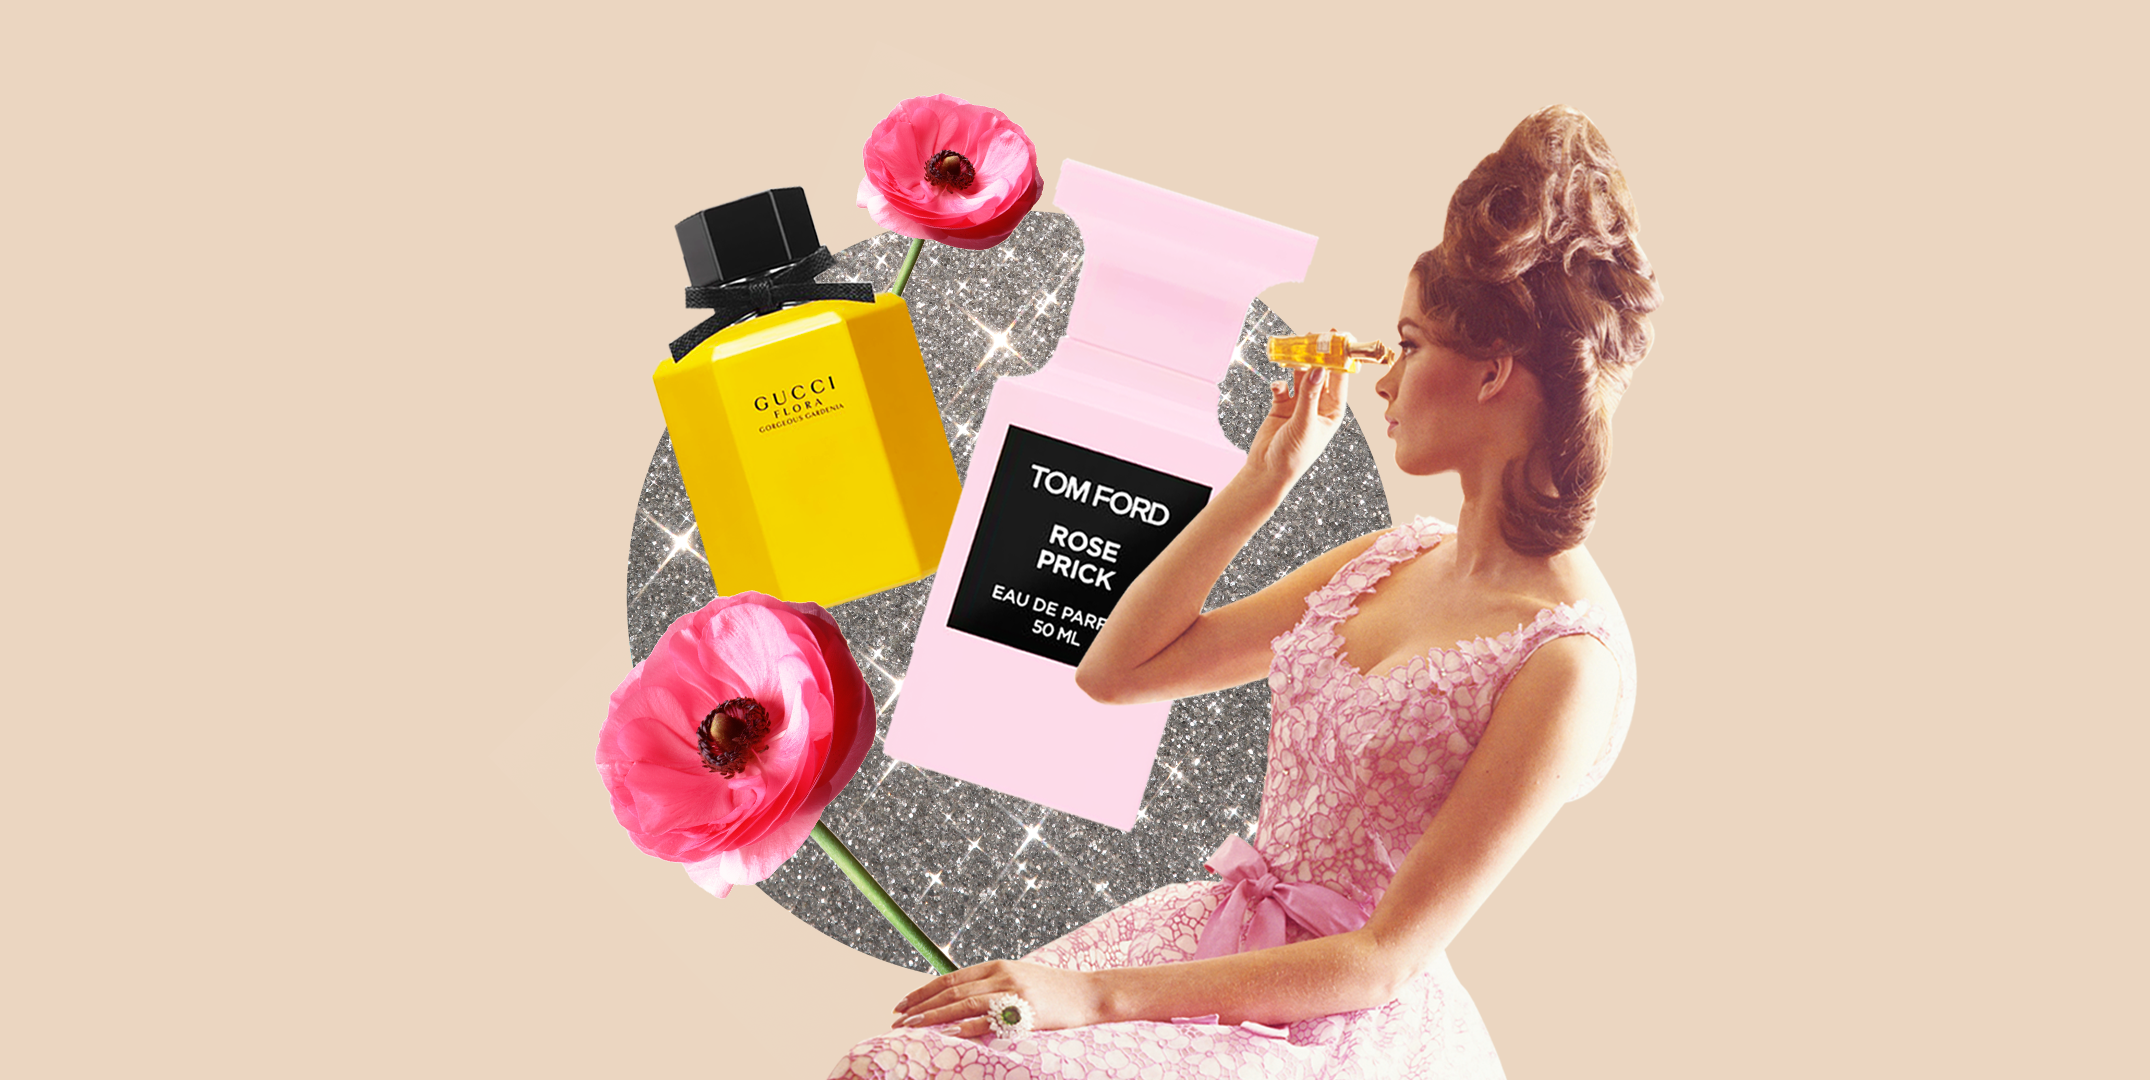 12 Best Floral Perfumes for 2020 - Floral Perfumes and Scents